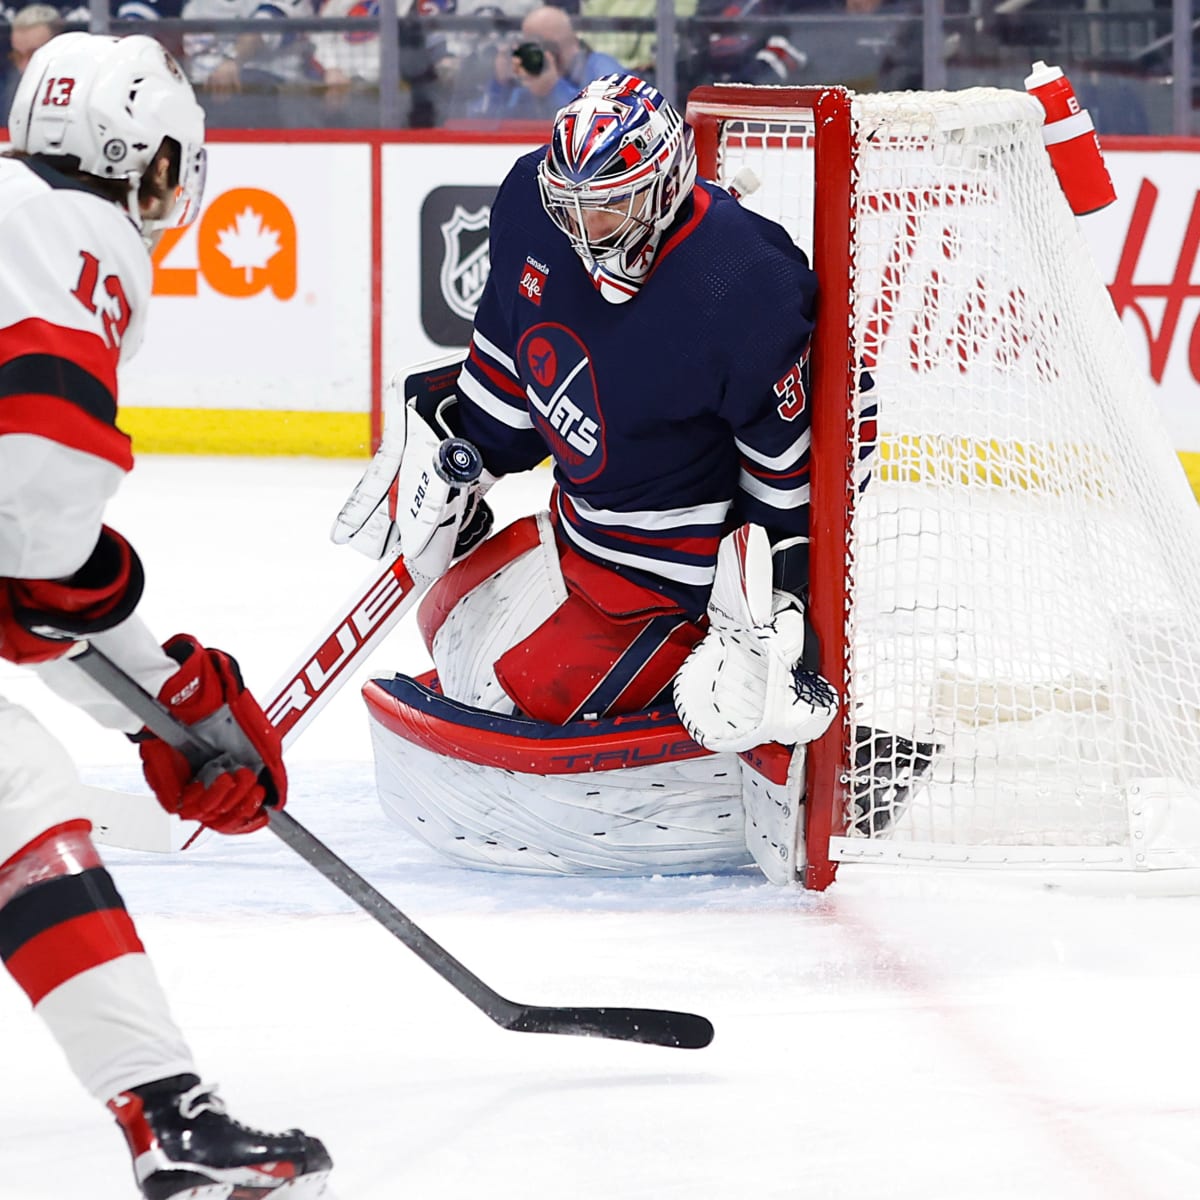 Why the New Jersey Devils are dominating the NHL - ABC7 New York